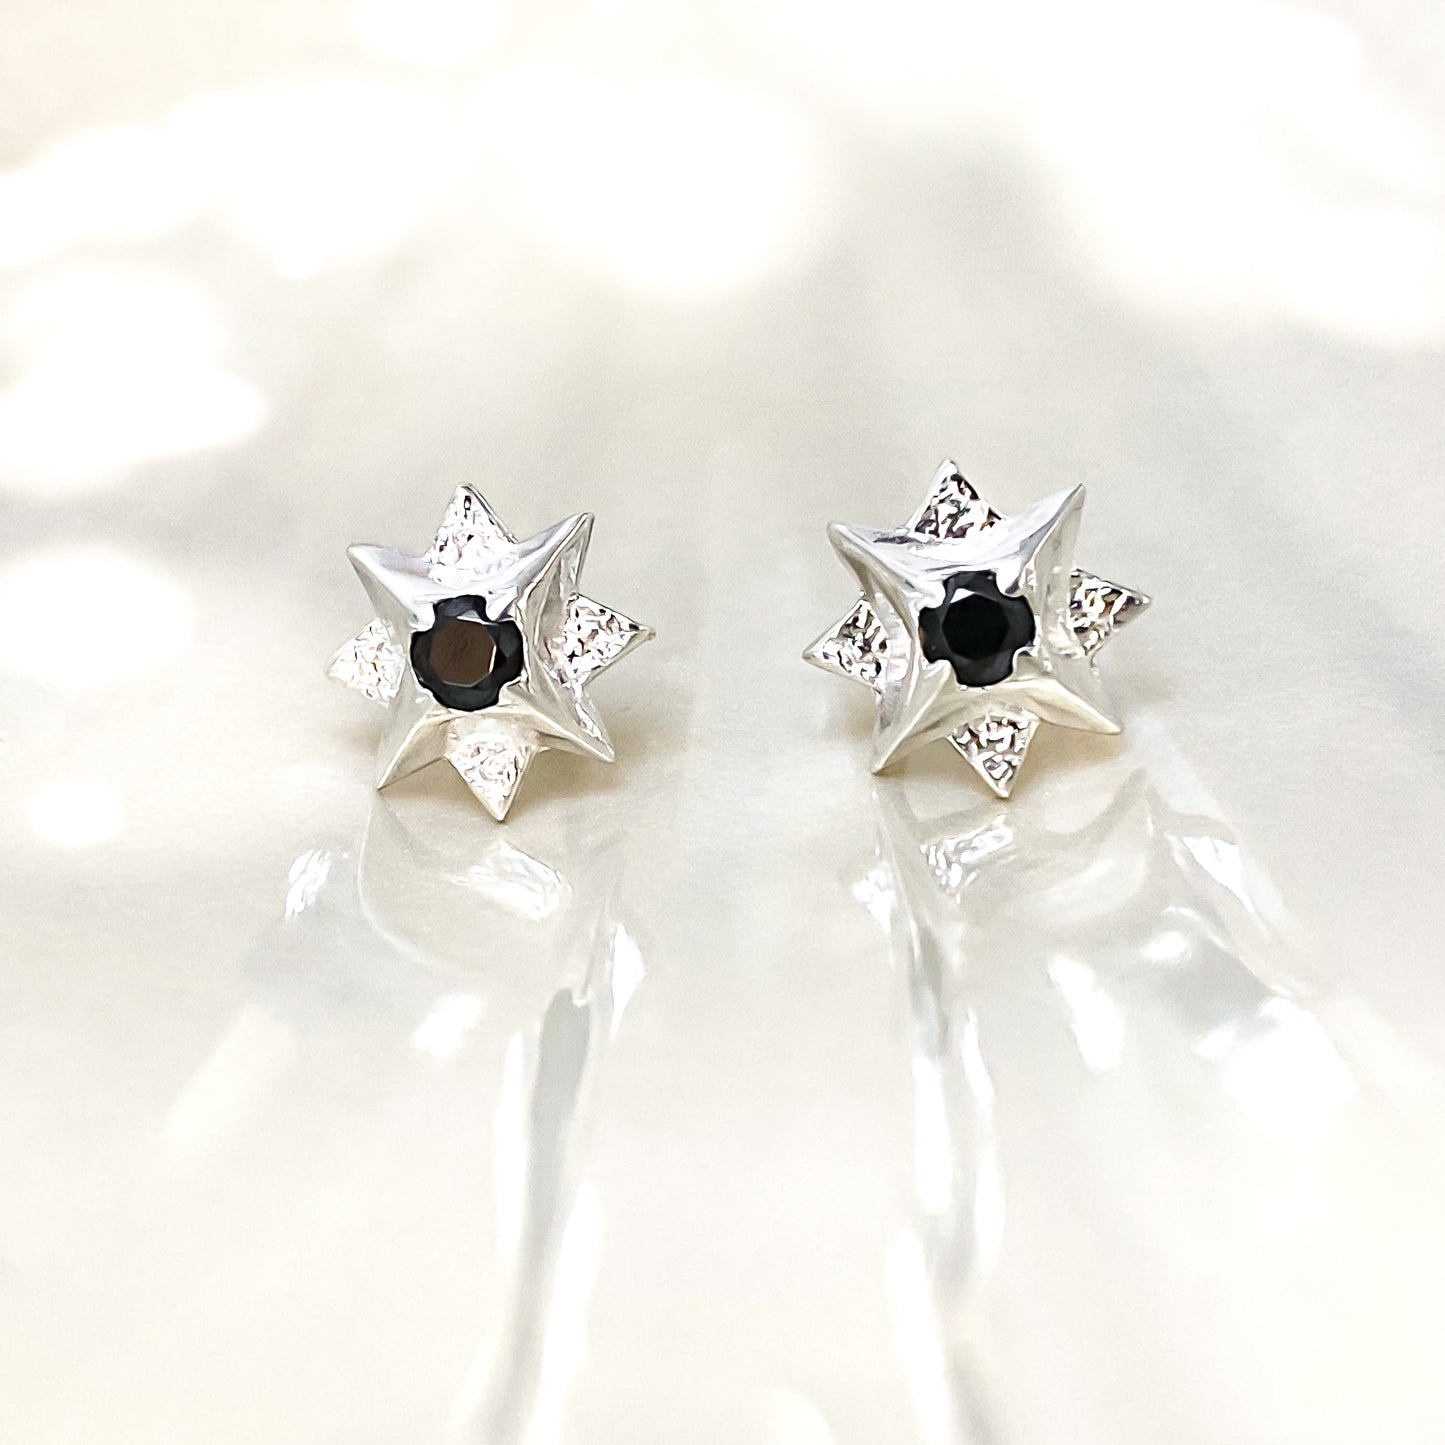 North Star Sterling Silver Stud Earrings with Black Spinel